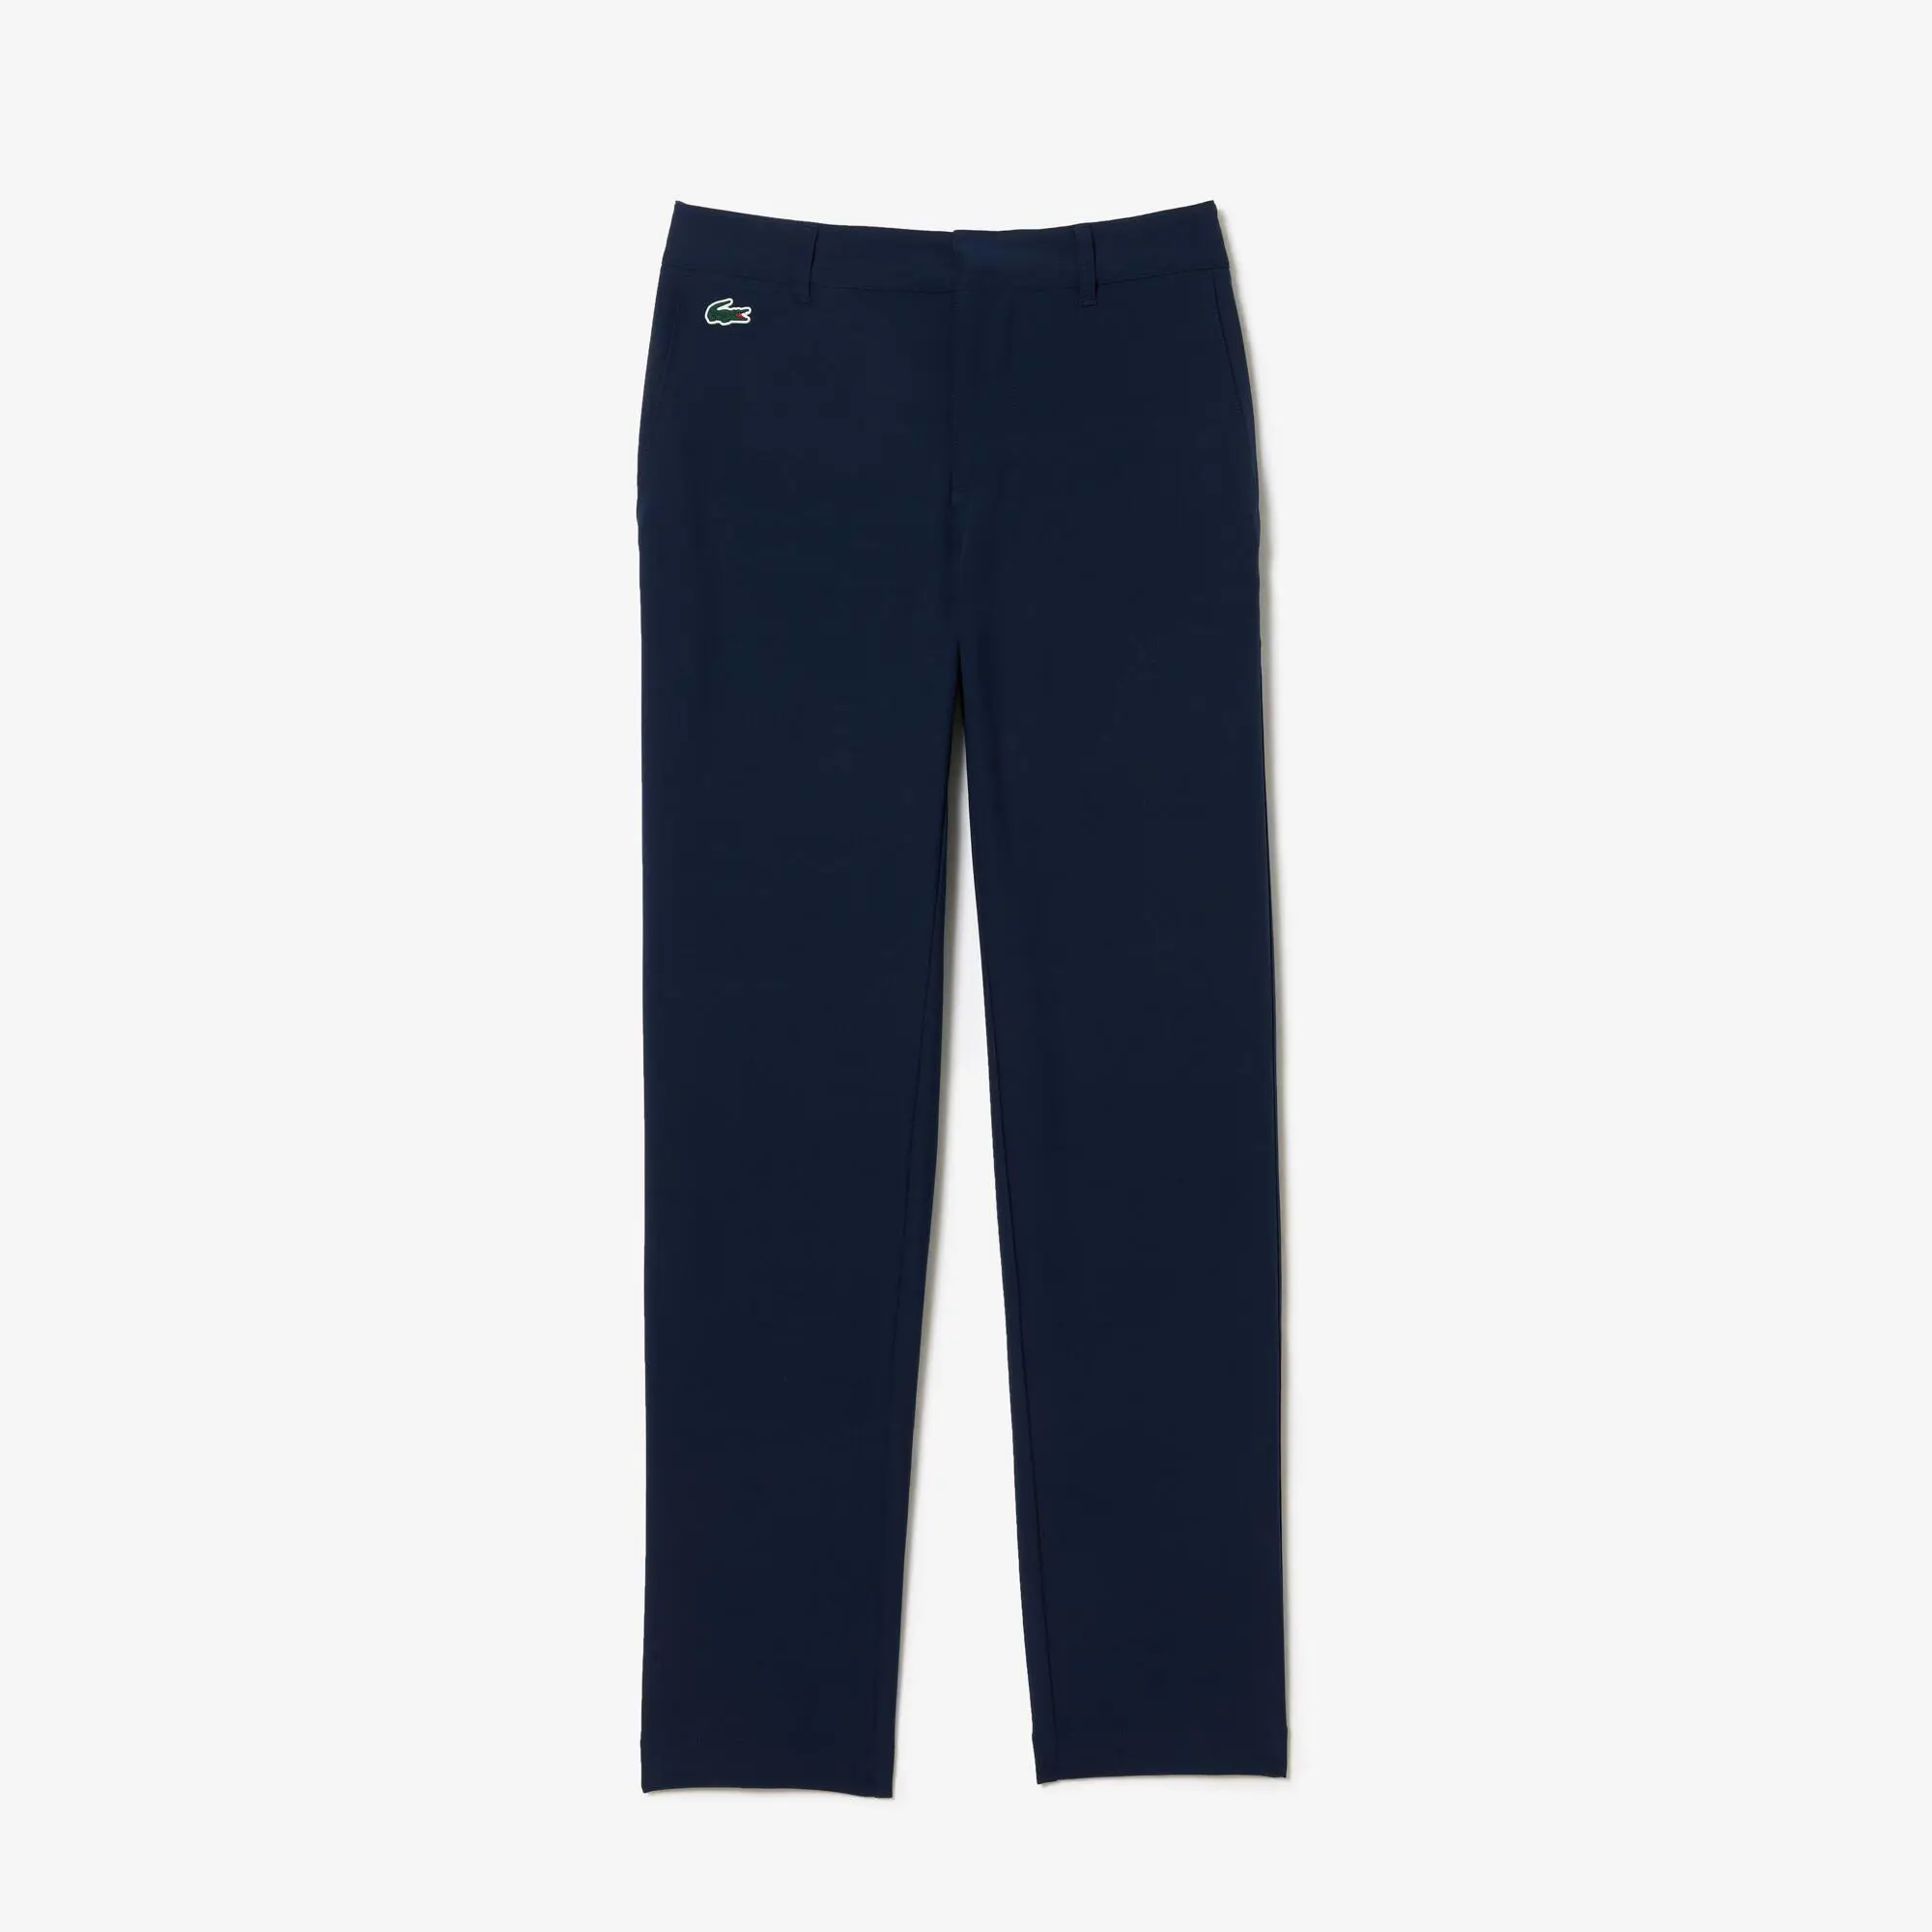 Lacoste Slim Fit Absorbent Twill Golf Pants. 2